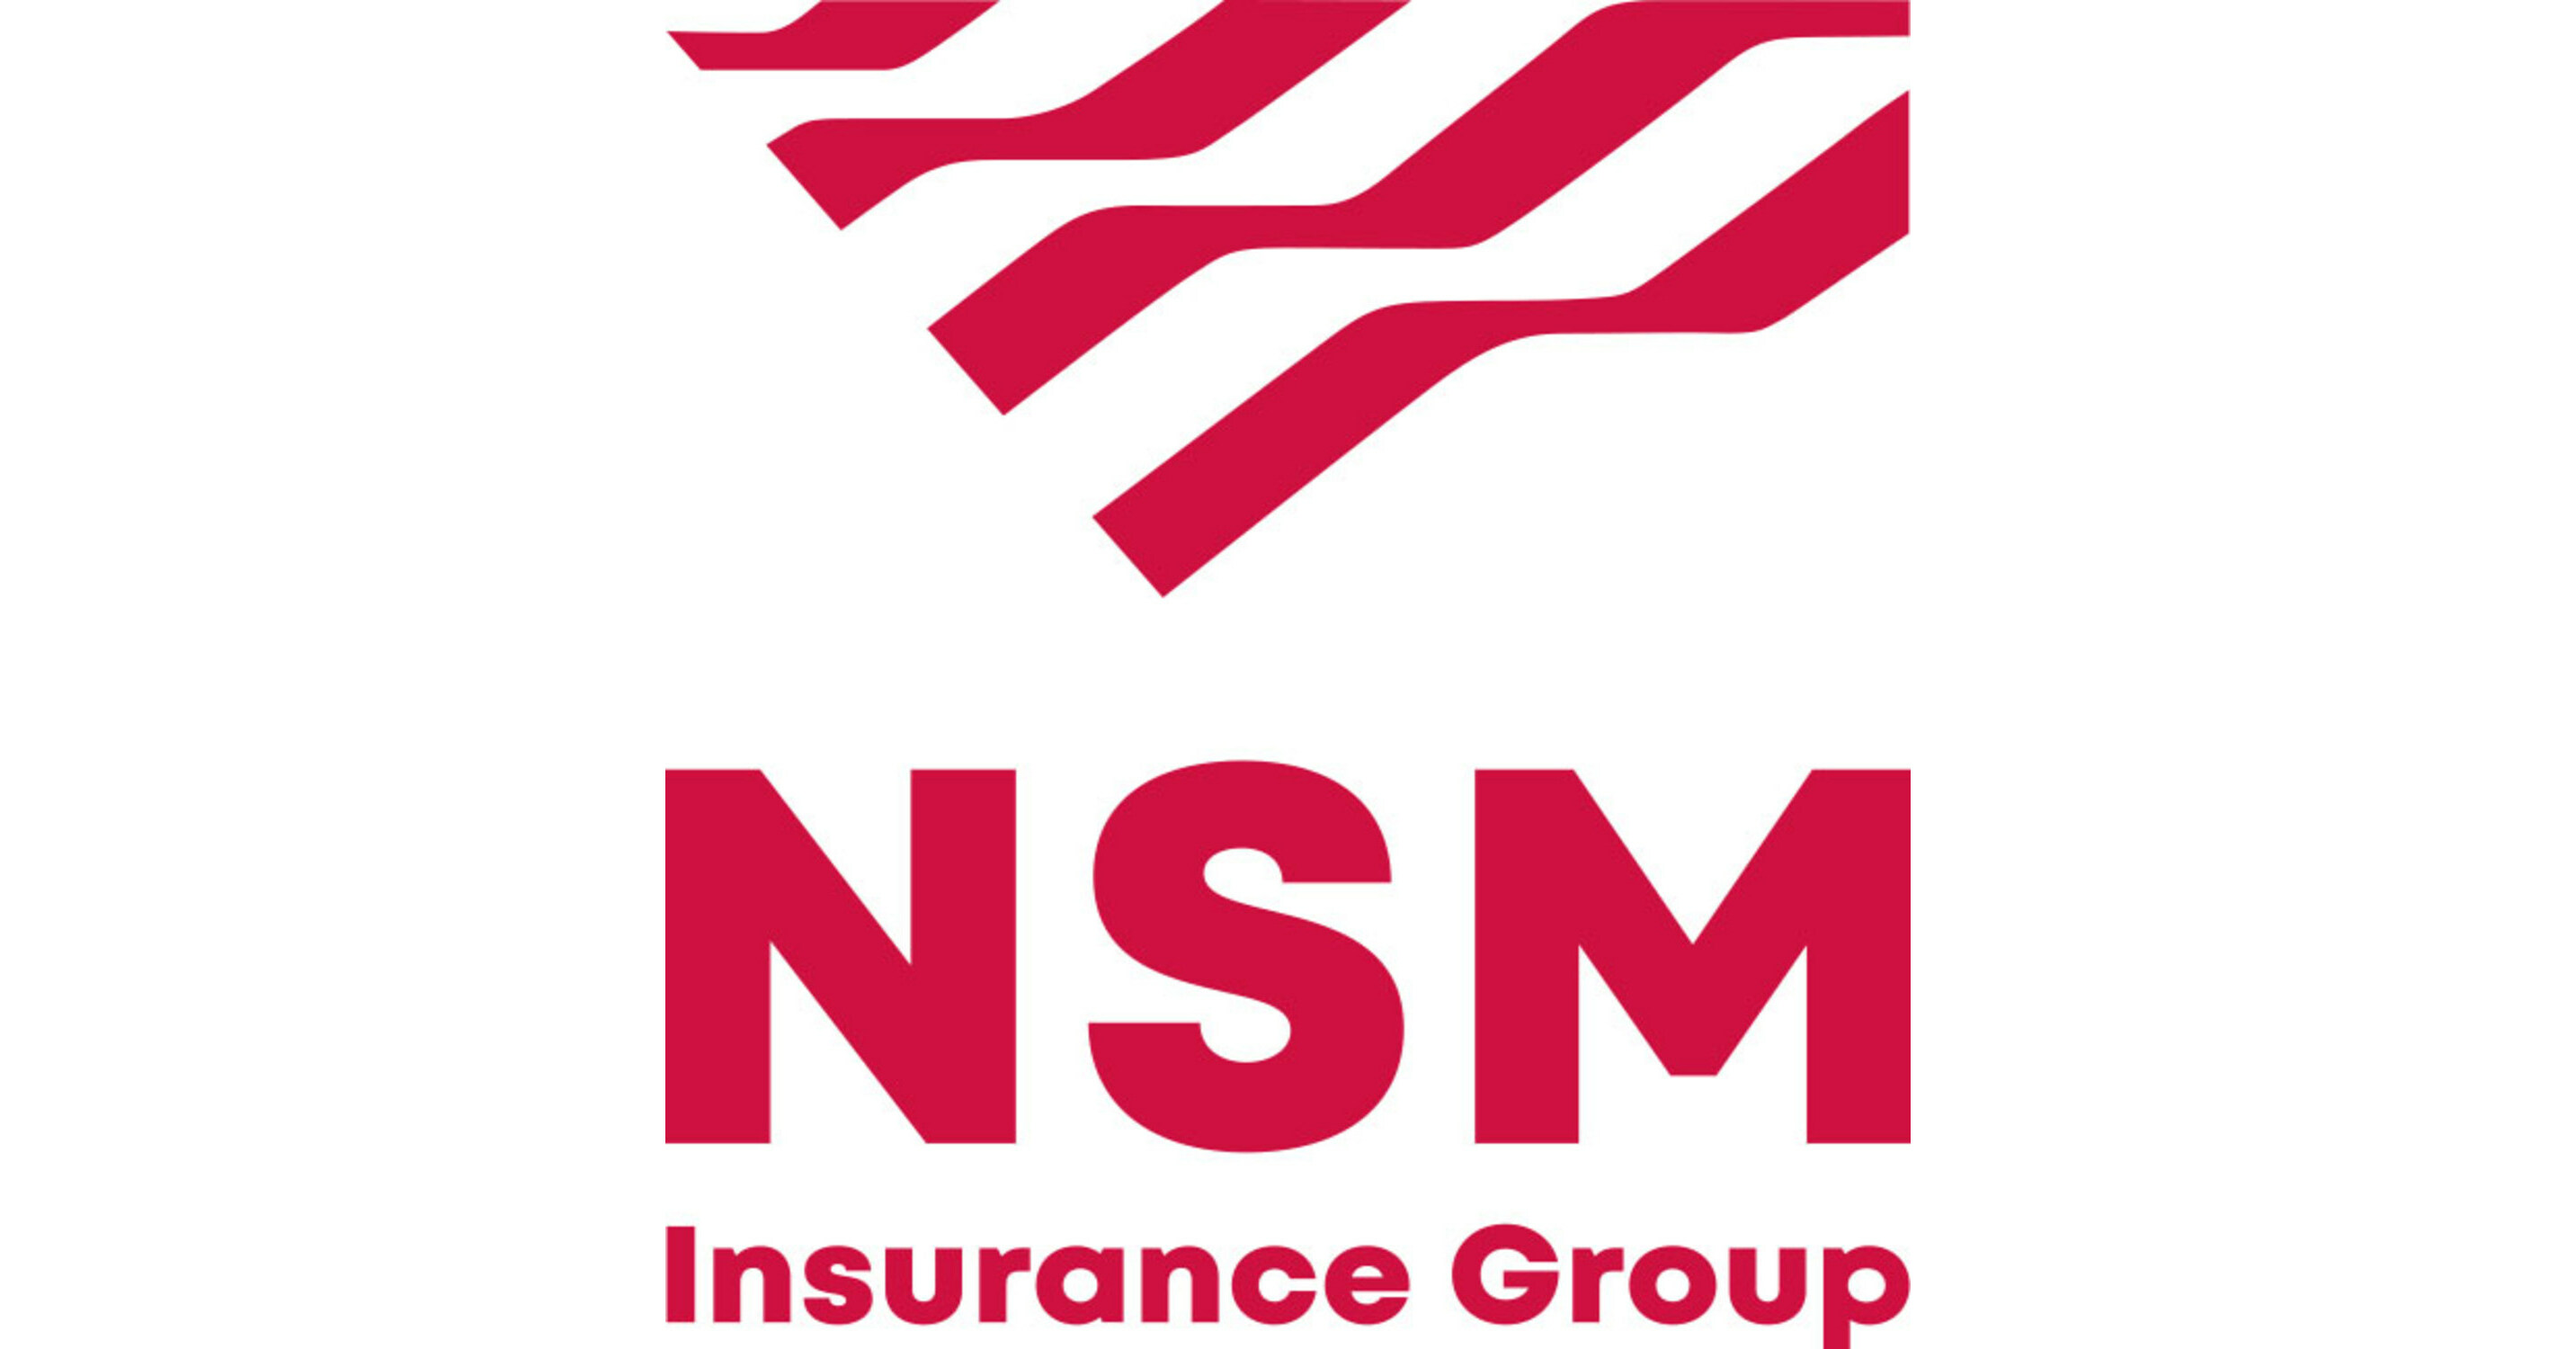 NSM Insurance Group Acquires Two Leading U.K. Travel Insurance Brands